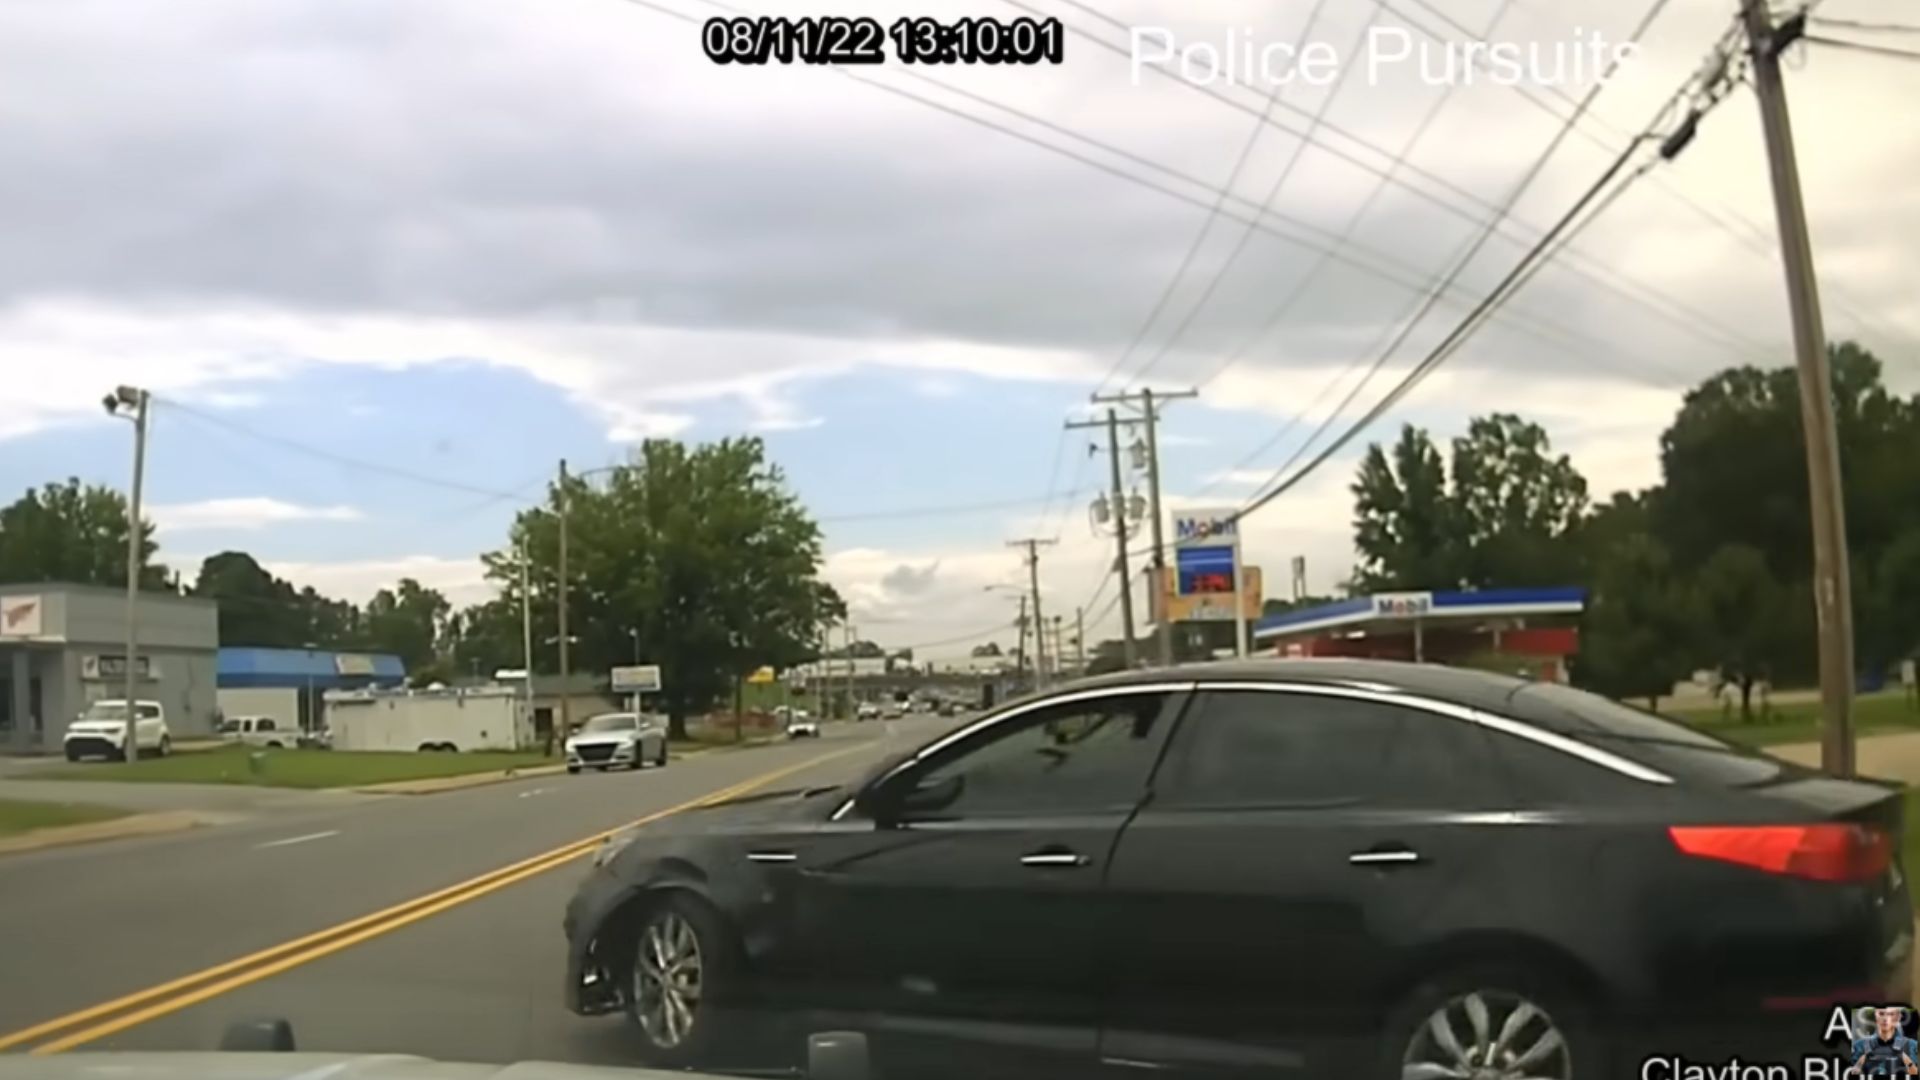 Watch An Arkansas Trooper PIT A Fleeing Suspect Head-On Into A Utility Pole